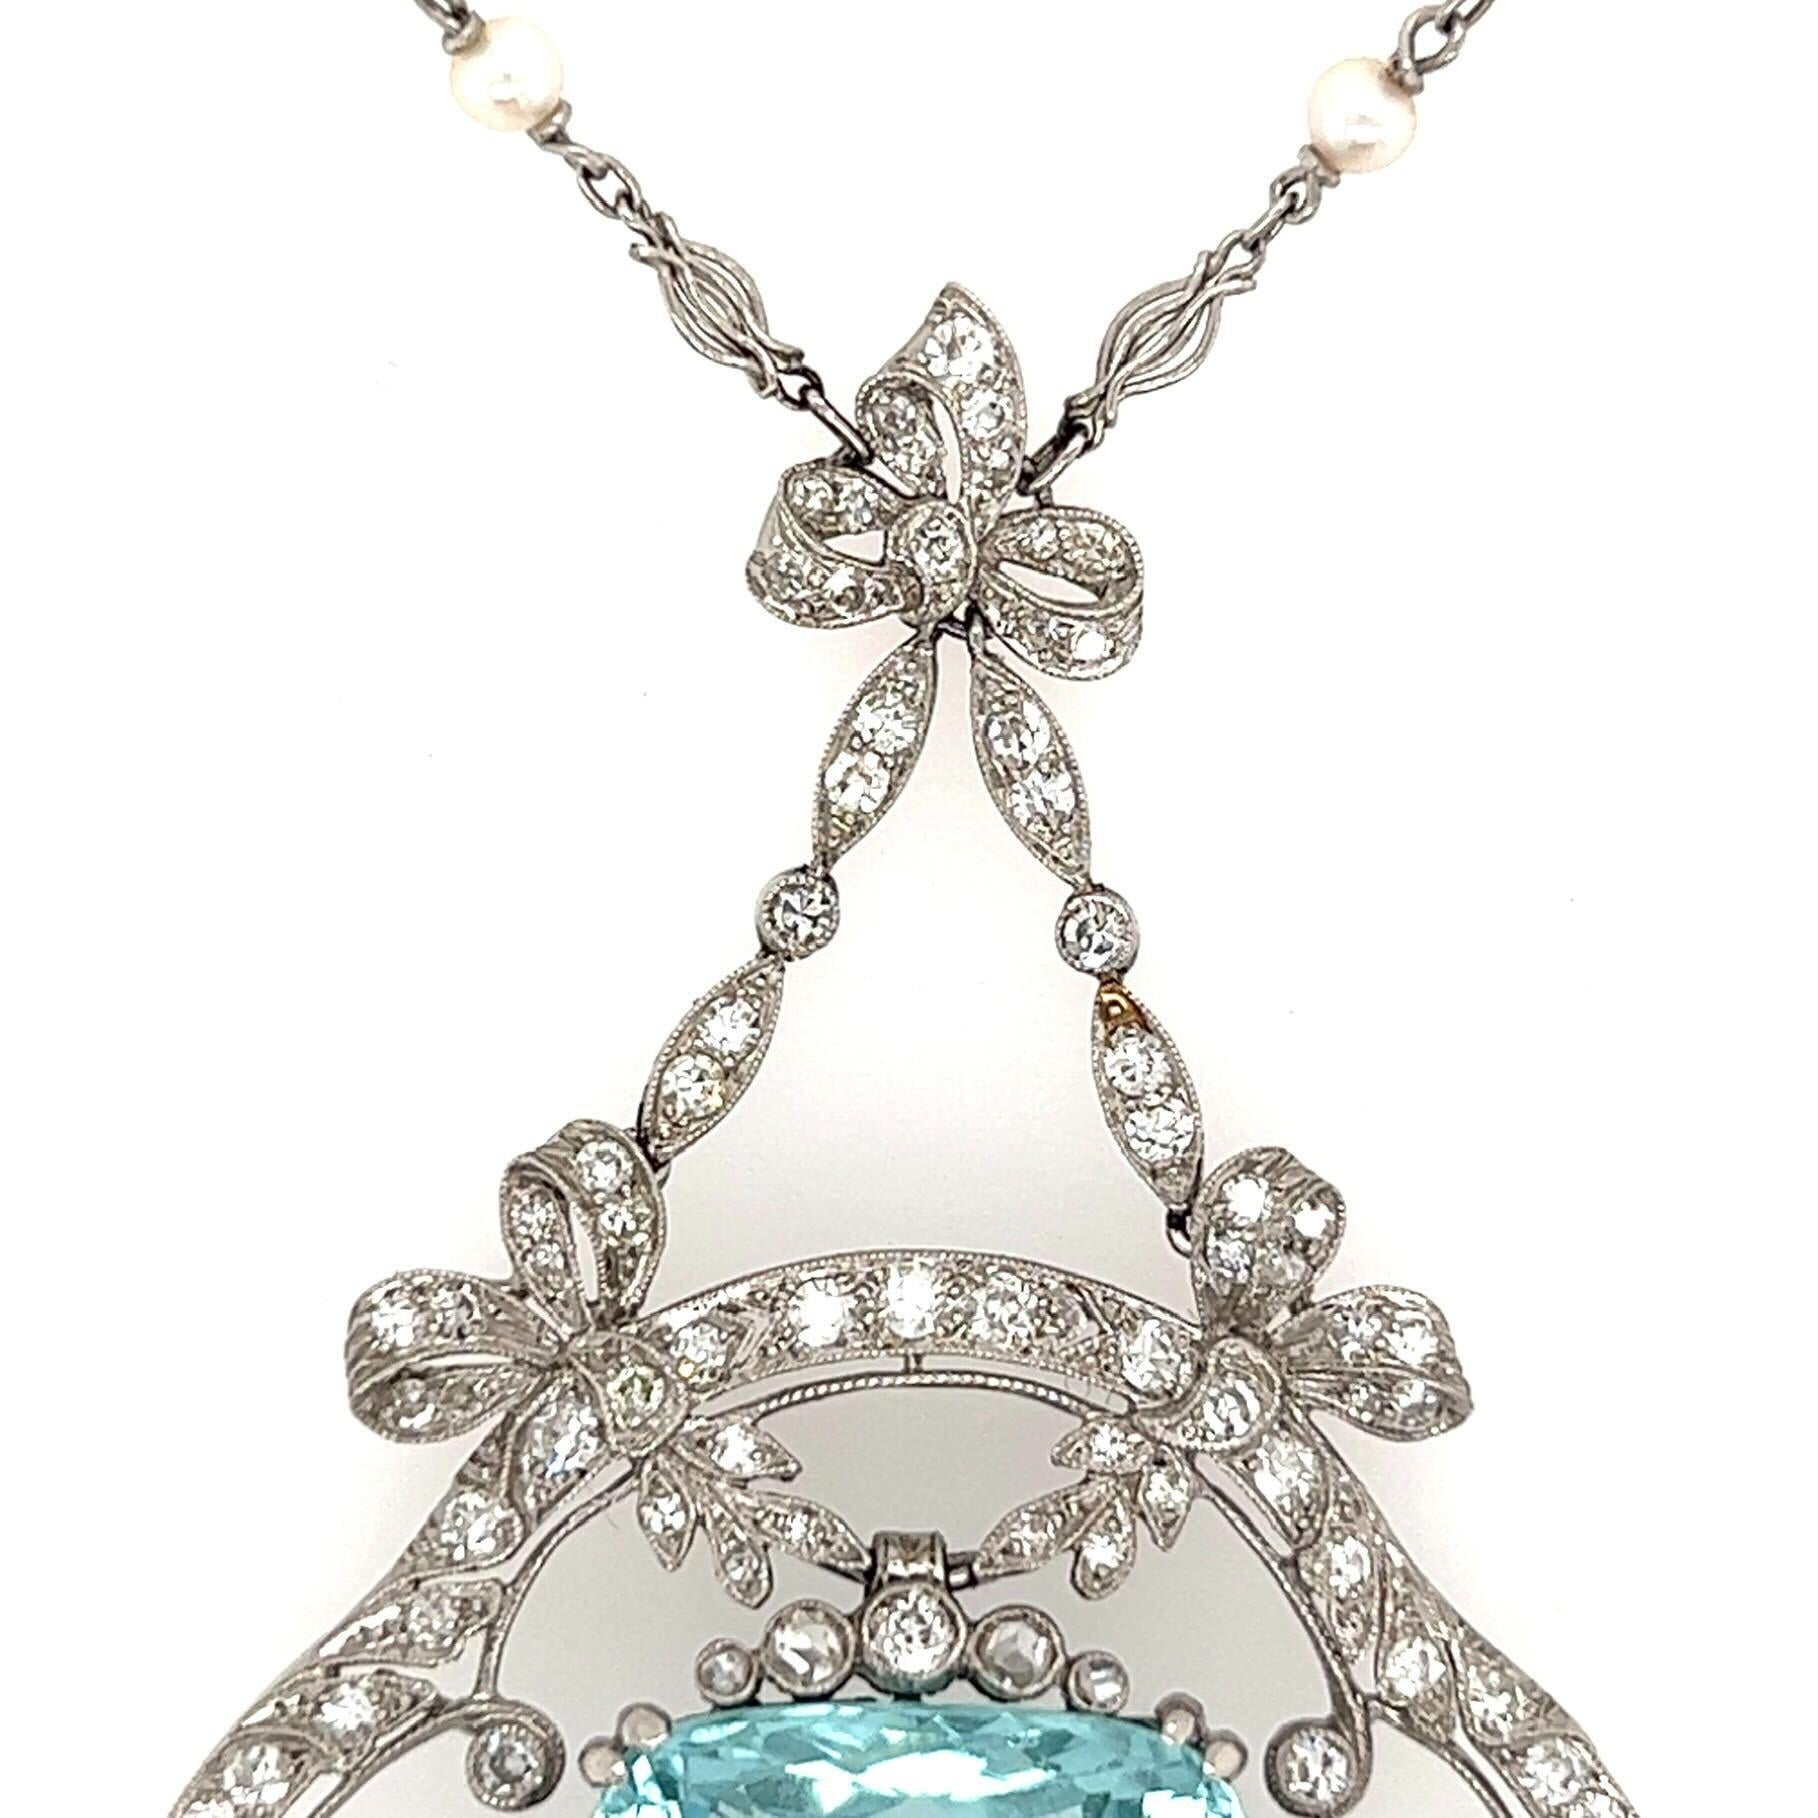 An antique platinum, aquamarine, pearl and diamond necklace, circa 1915.  The lavaliere designed as a ribbon form set with approximately thirty eight (38) old European cut diamonds suspending an open quatrefoil set with approximately fifty eight